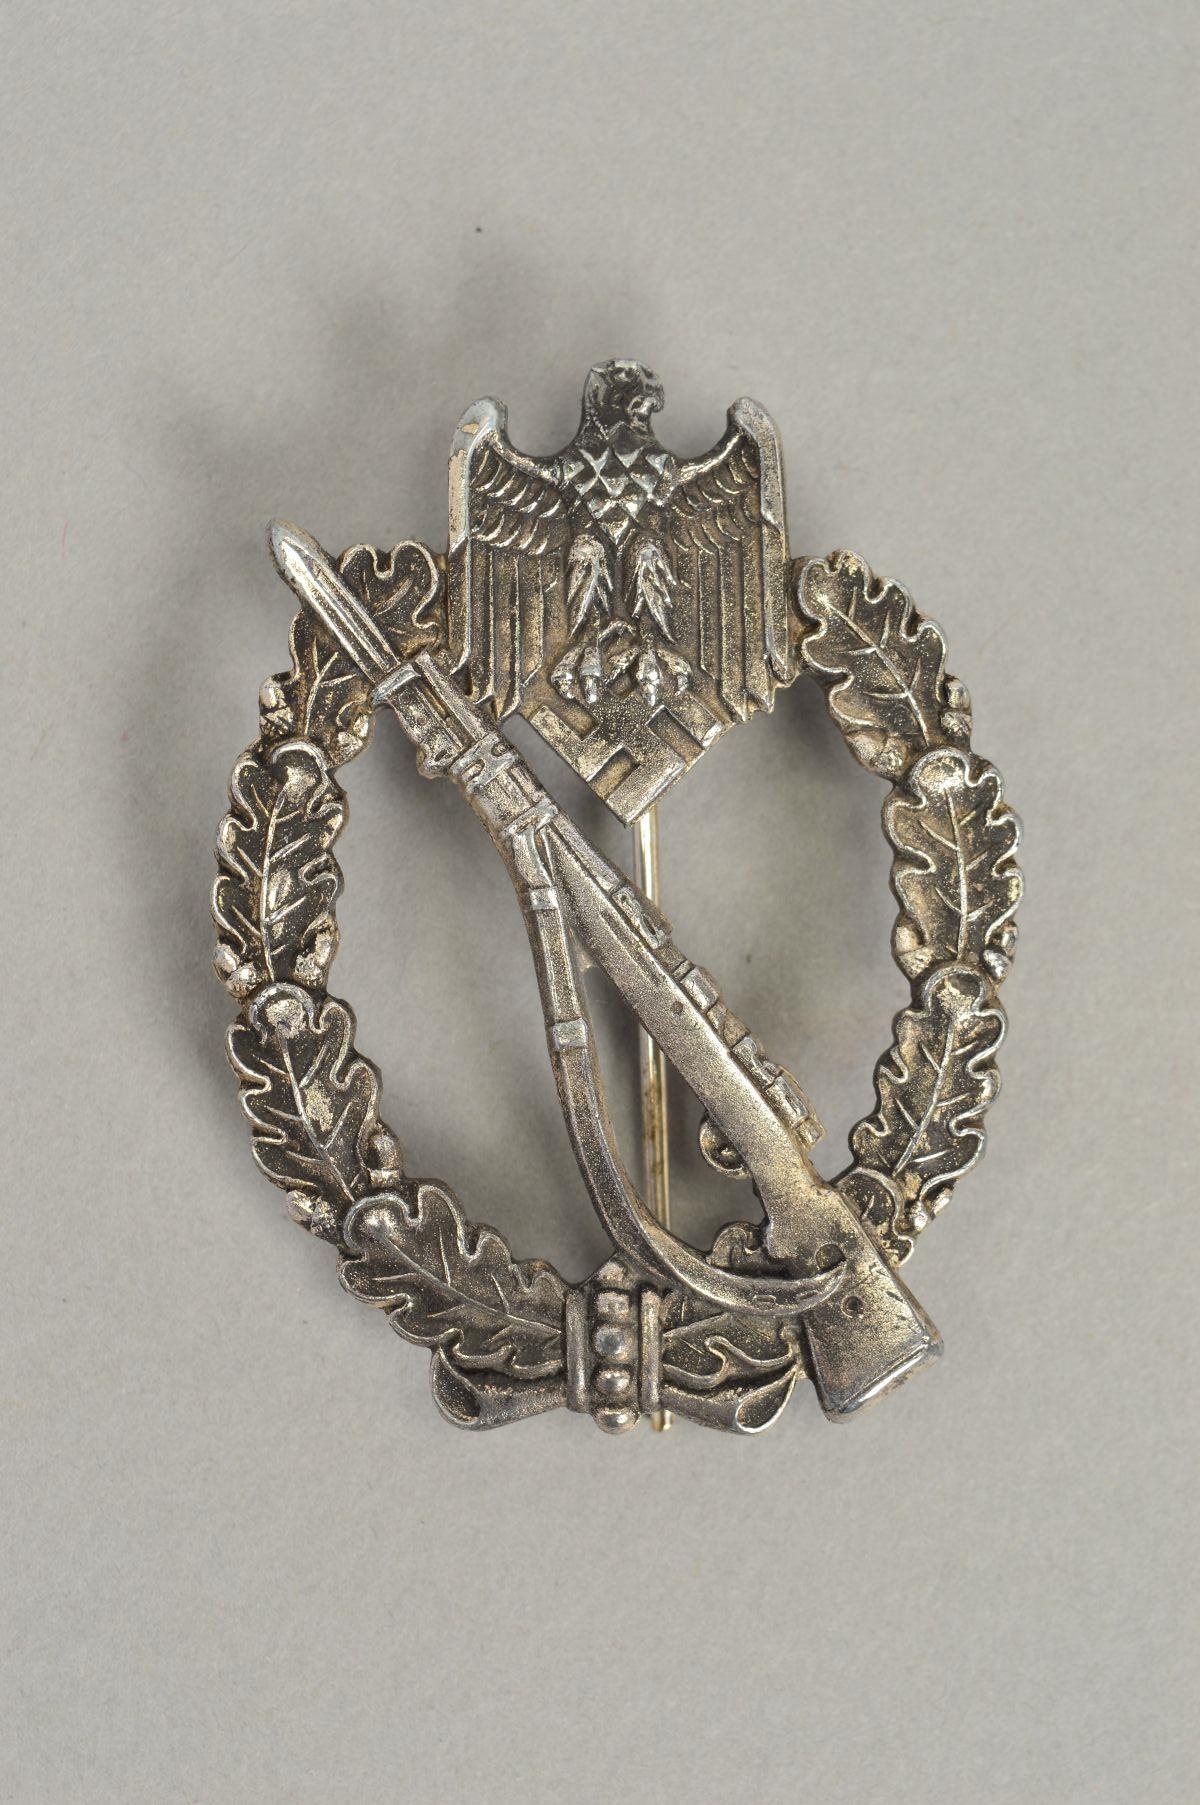 A WWII GERMAN 3RD REICH 'INFANTERIE STURMABZEICHEN' INFANTRY ASSAULT BADGE, this example in silver